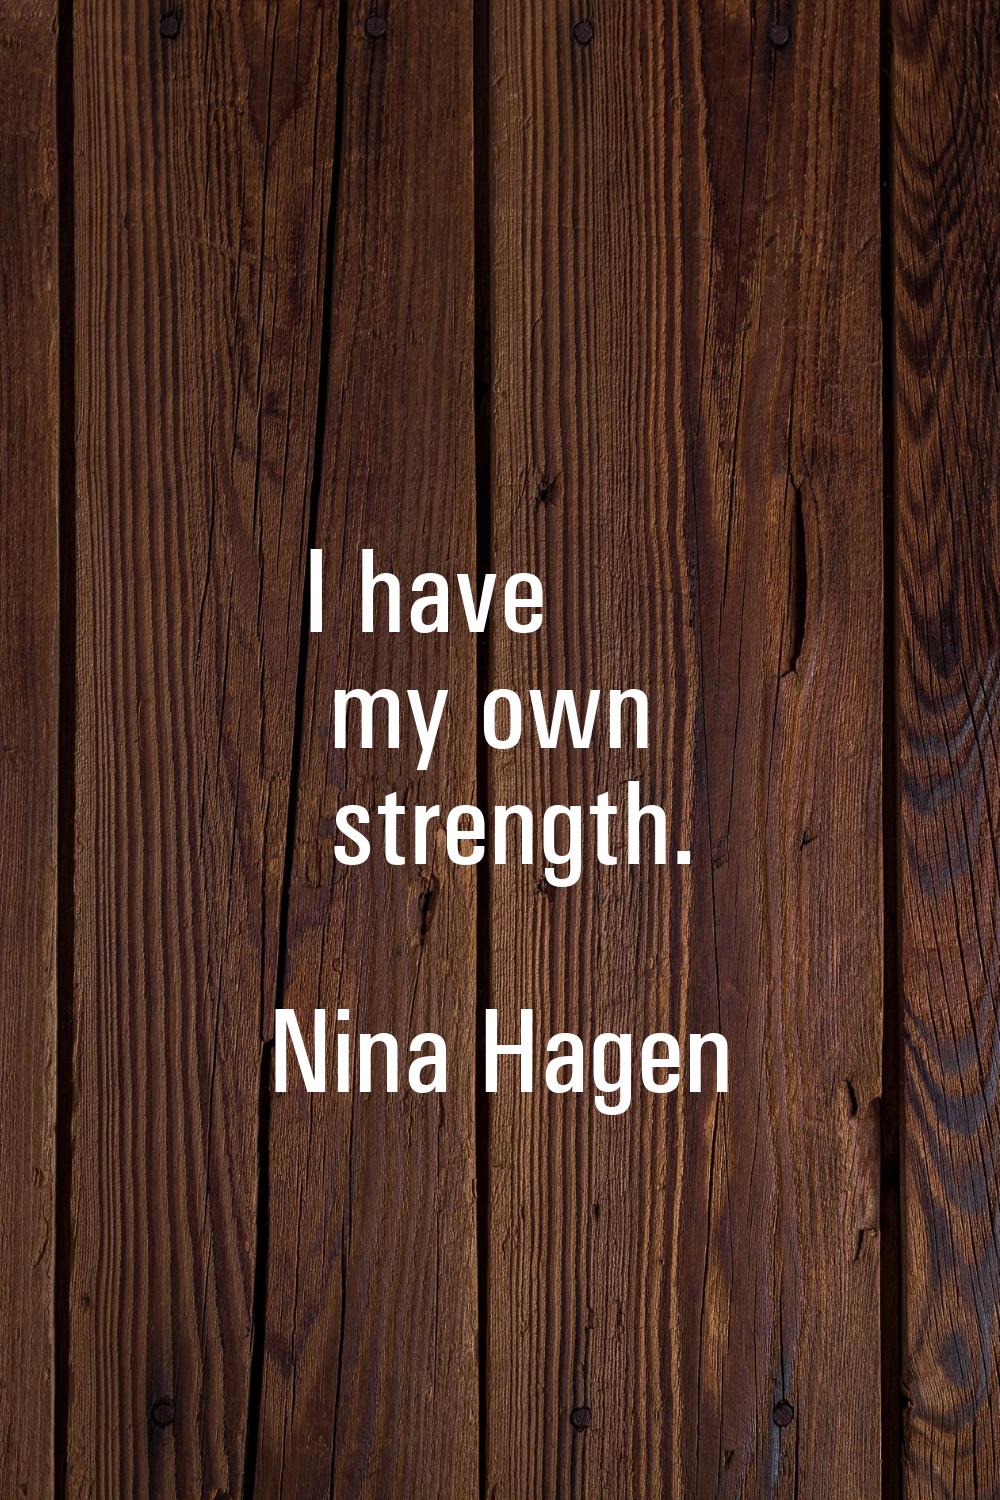 I have my own strength.